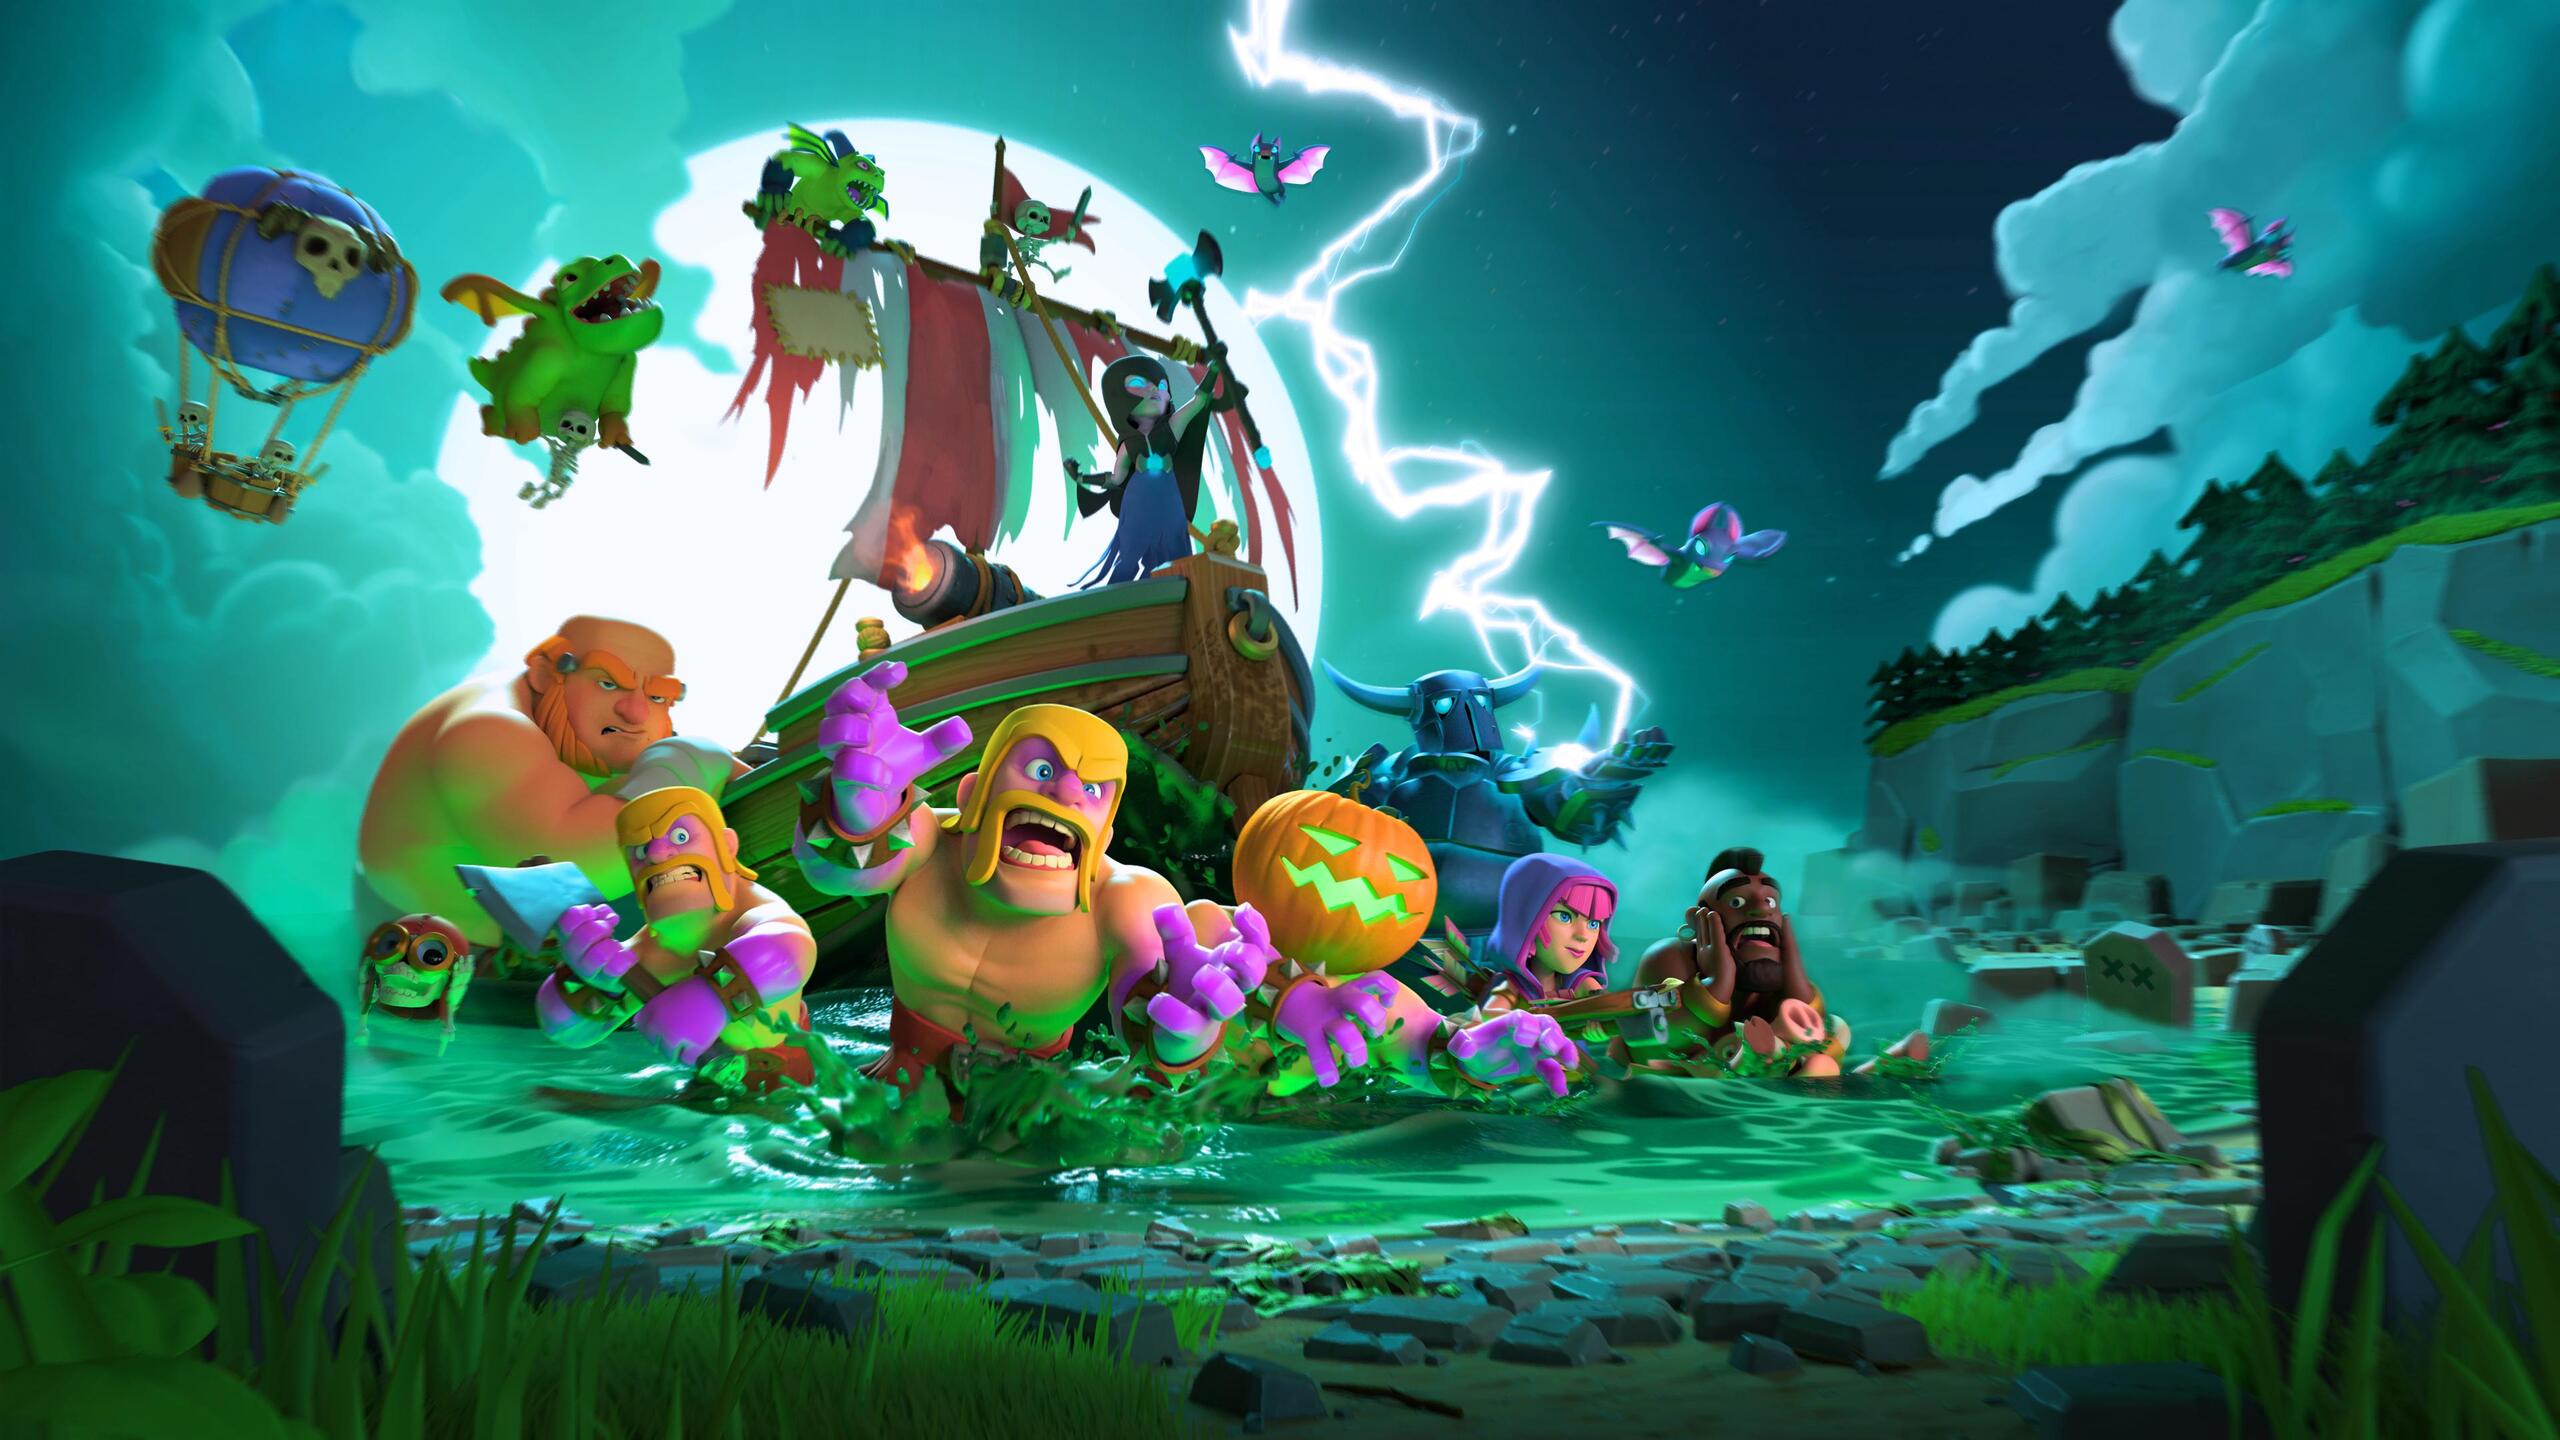 Clash of Clans Wallpaper Free 2560X1440 Clash of Clans Background